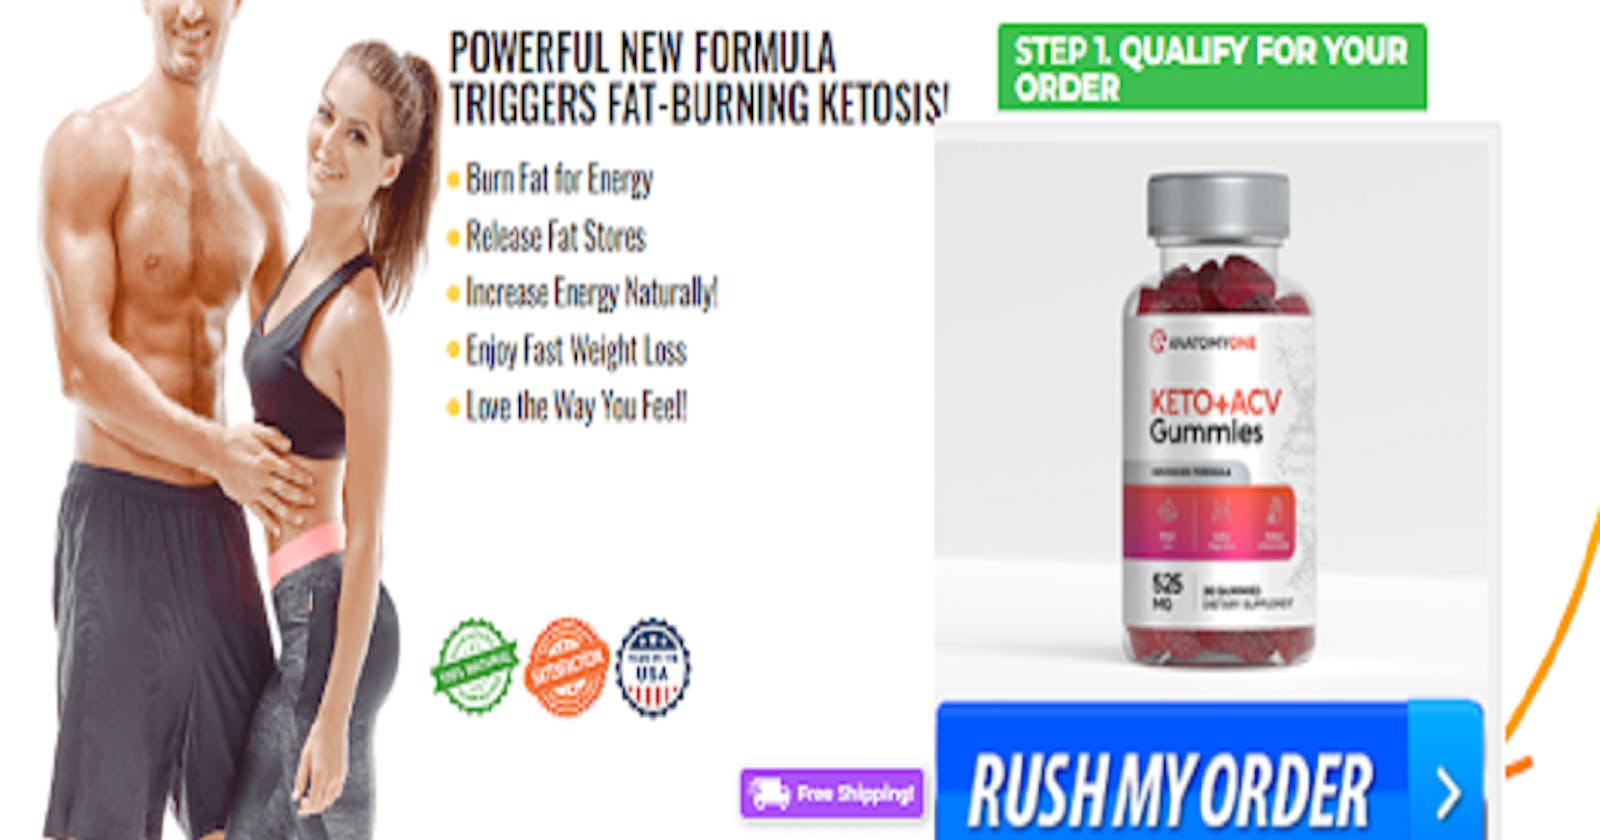 Anatomy One Keto ACV Gummies Reviews: WEIGHT LOSS PILL DANGERS OR IS IT LEGIT ! SHOCKING USER COMPLAINTS What to Know Before Buying These Pills?